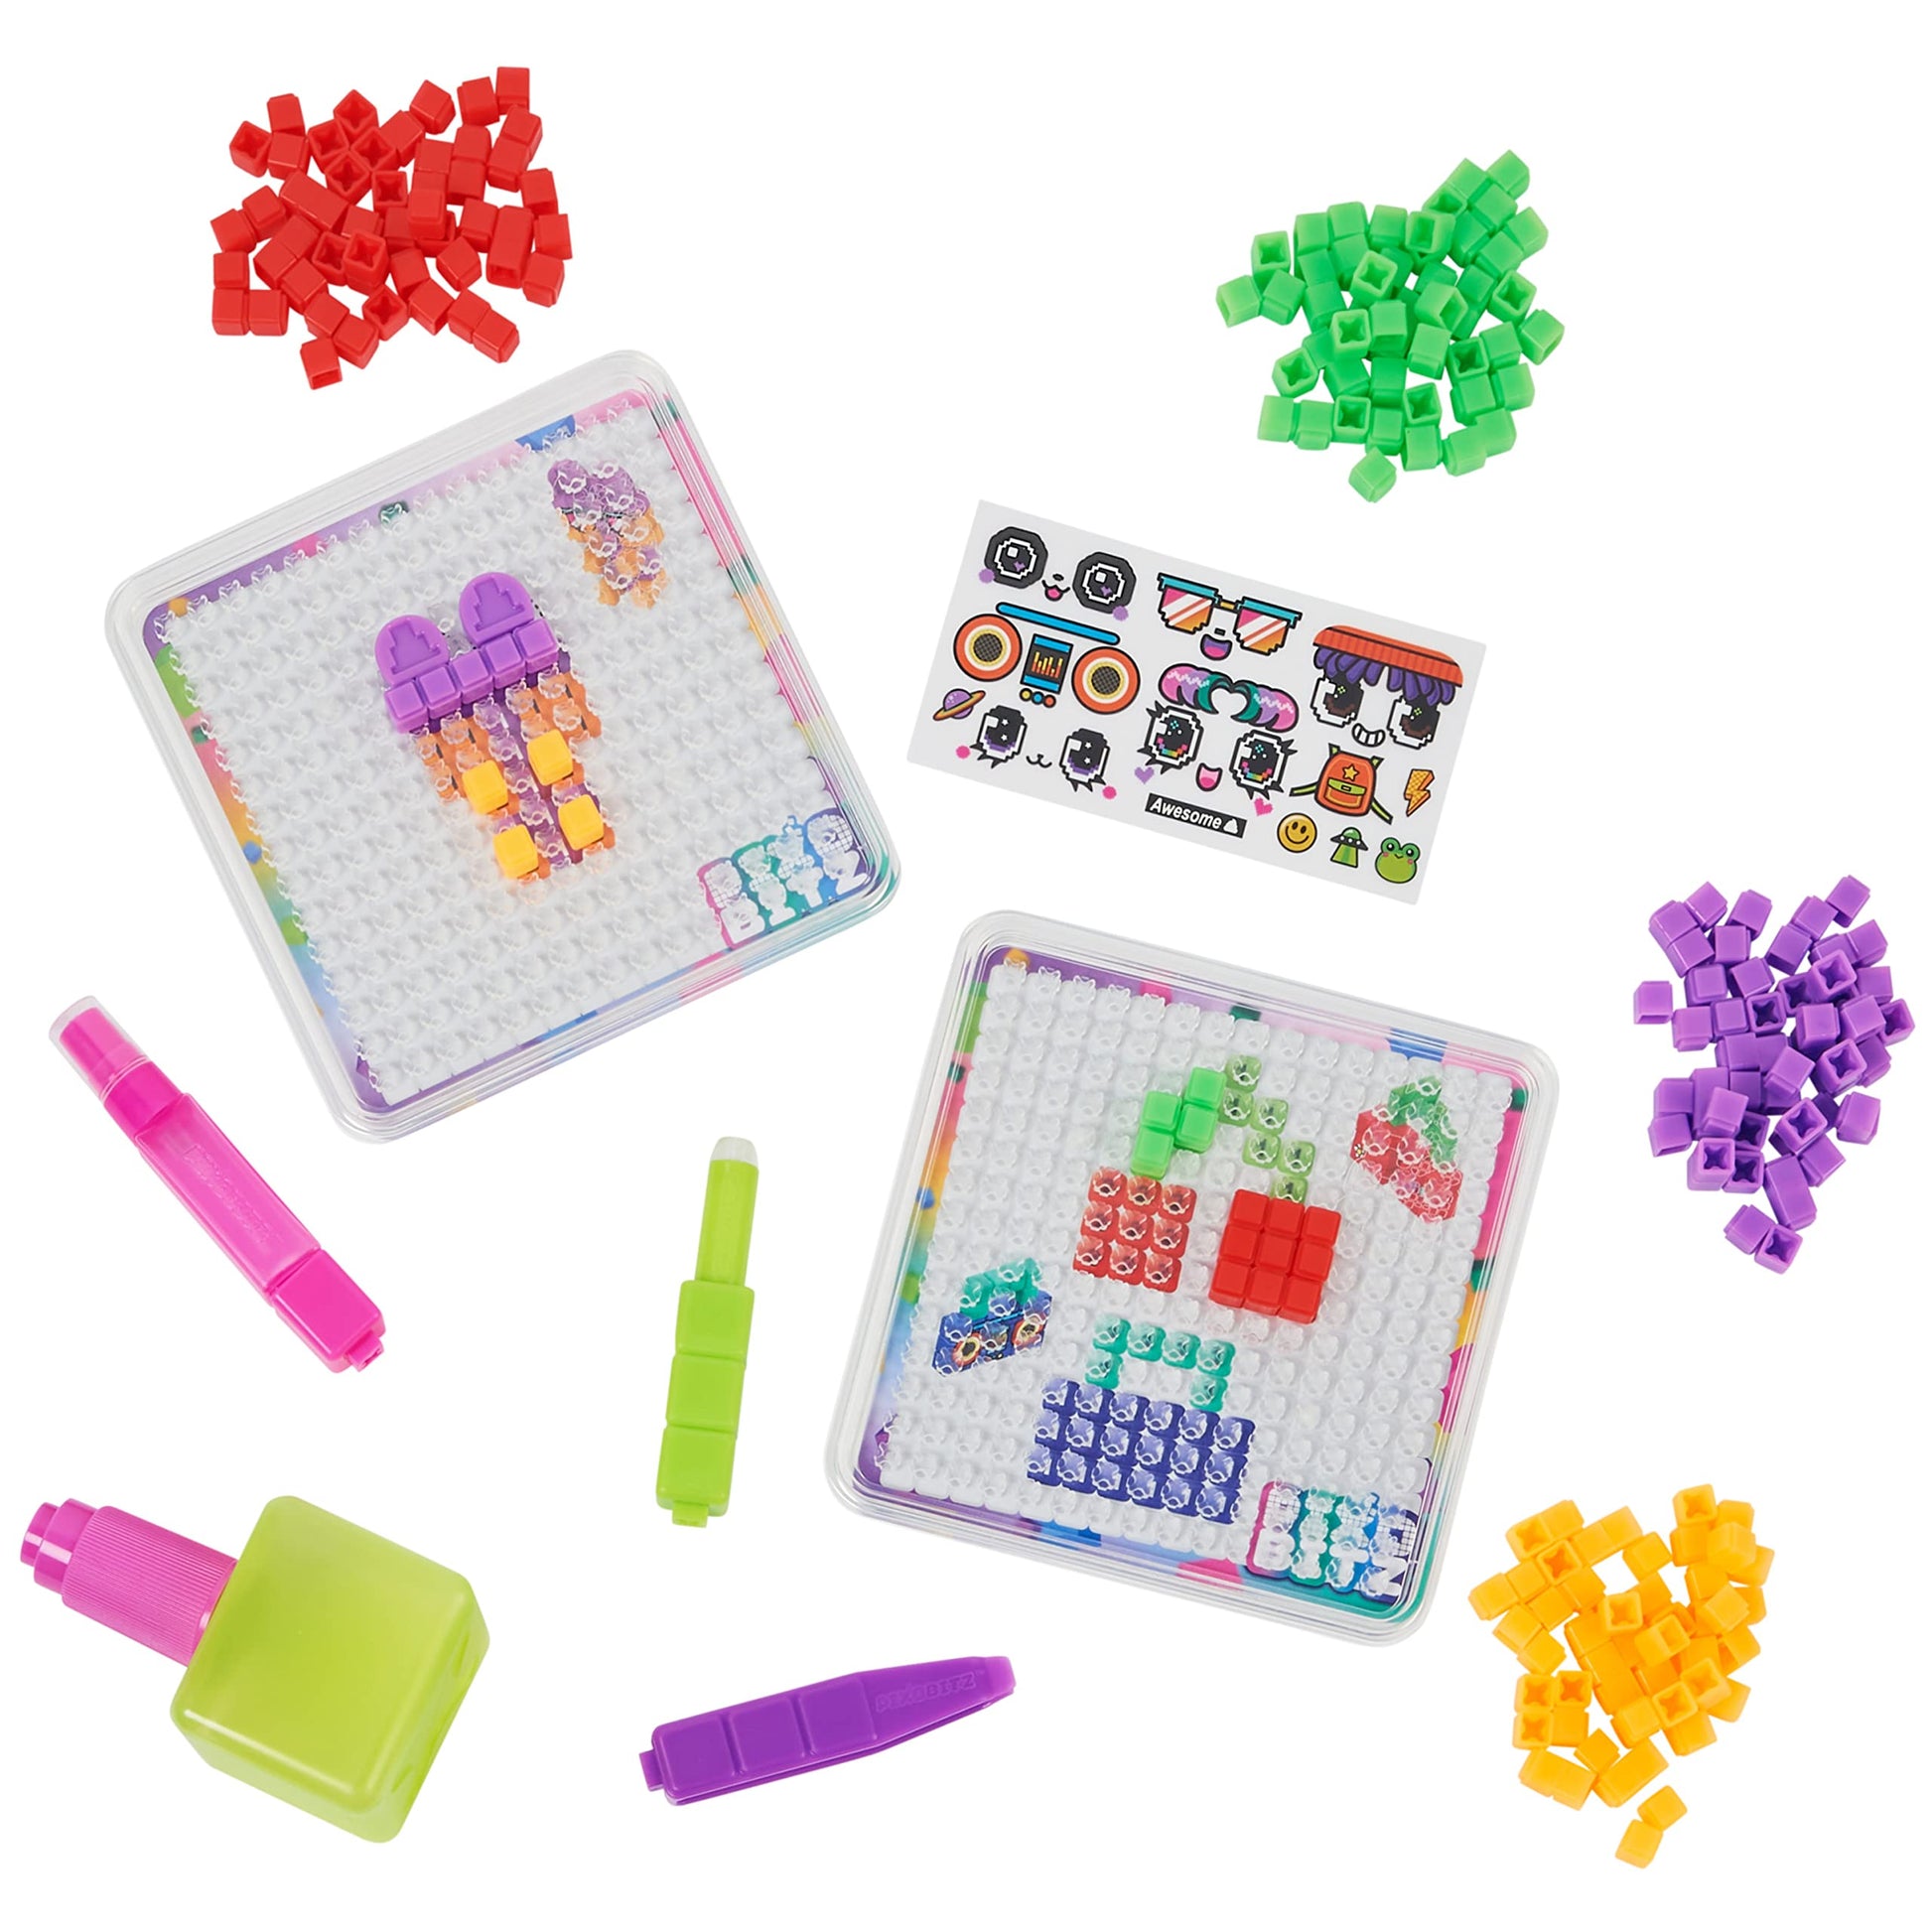  Pixobitz, Recharge Pack 270 Water Fuse Beads, Decos and  Accessories Creative Activity STEM Arts and Crafts Kids' Toys for Girls &  Boys Ages 6 and up : Toys & Games